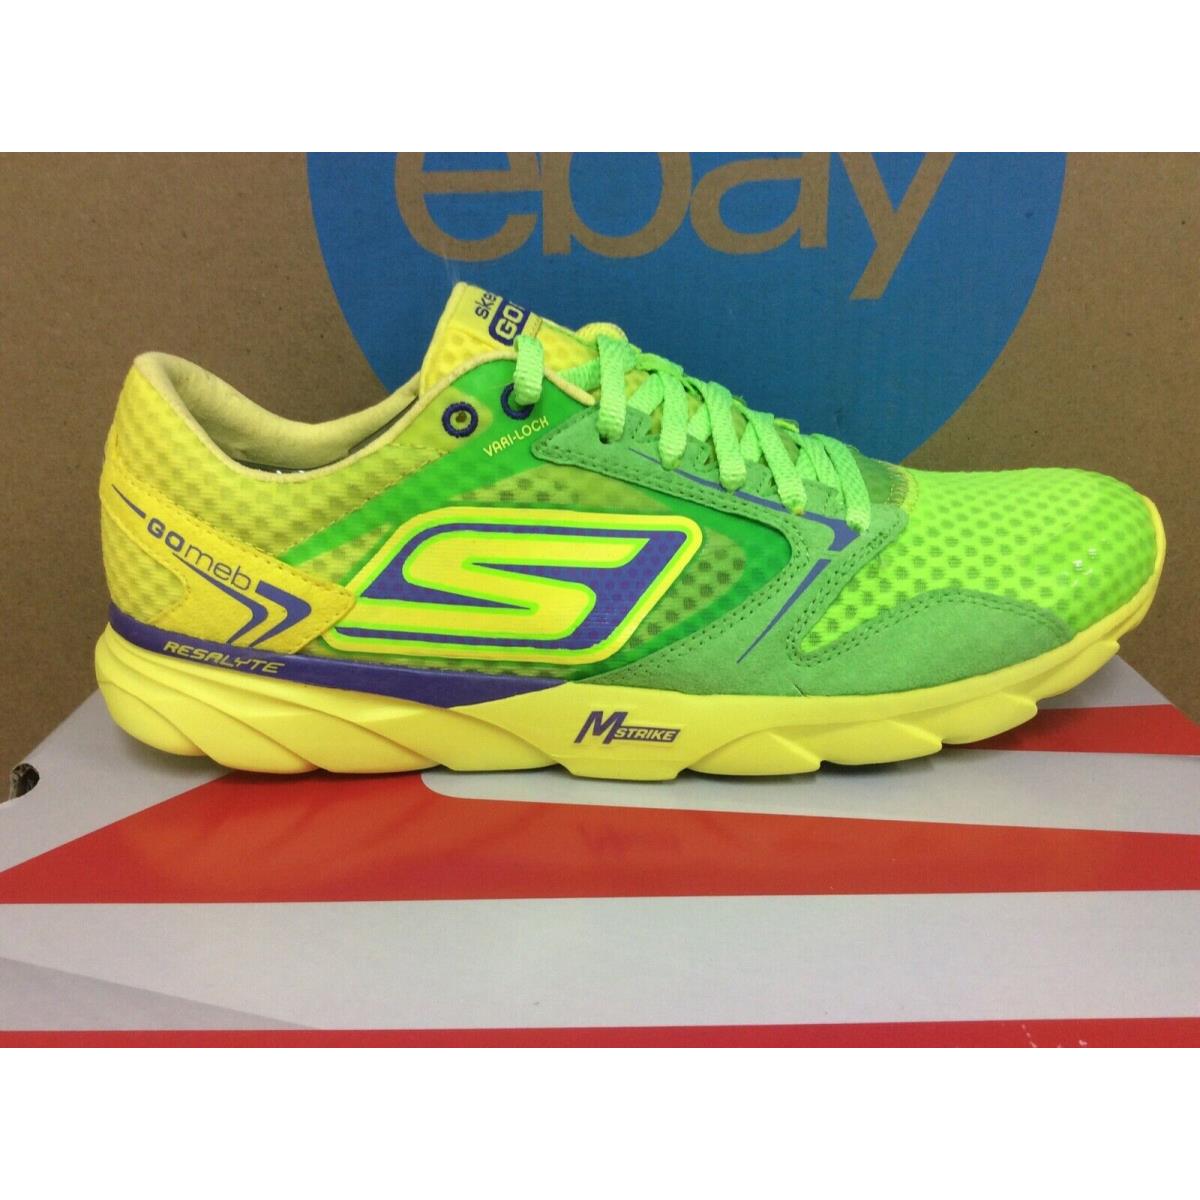 Skechers shoes Run Speed - Gray Lime 7